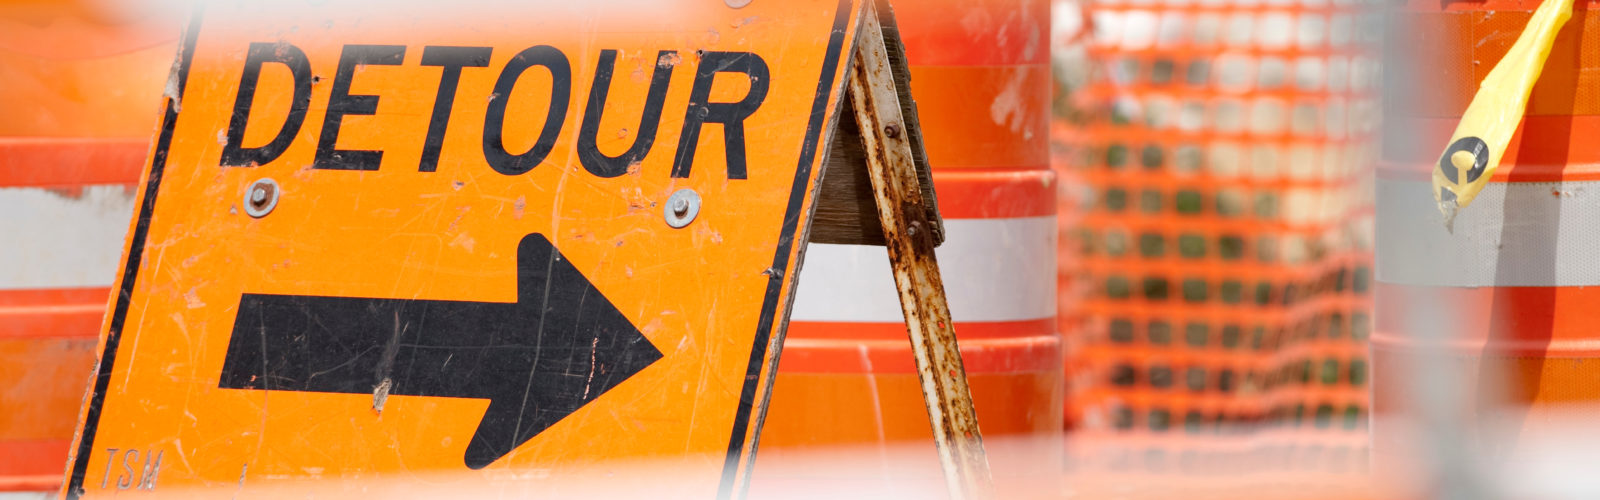 Picture of an area blocked by construction barricades and other traffic management signs. Focus is on a bright orange sign stating "Detour" with an arrow pointing to the right.